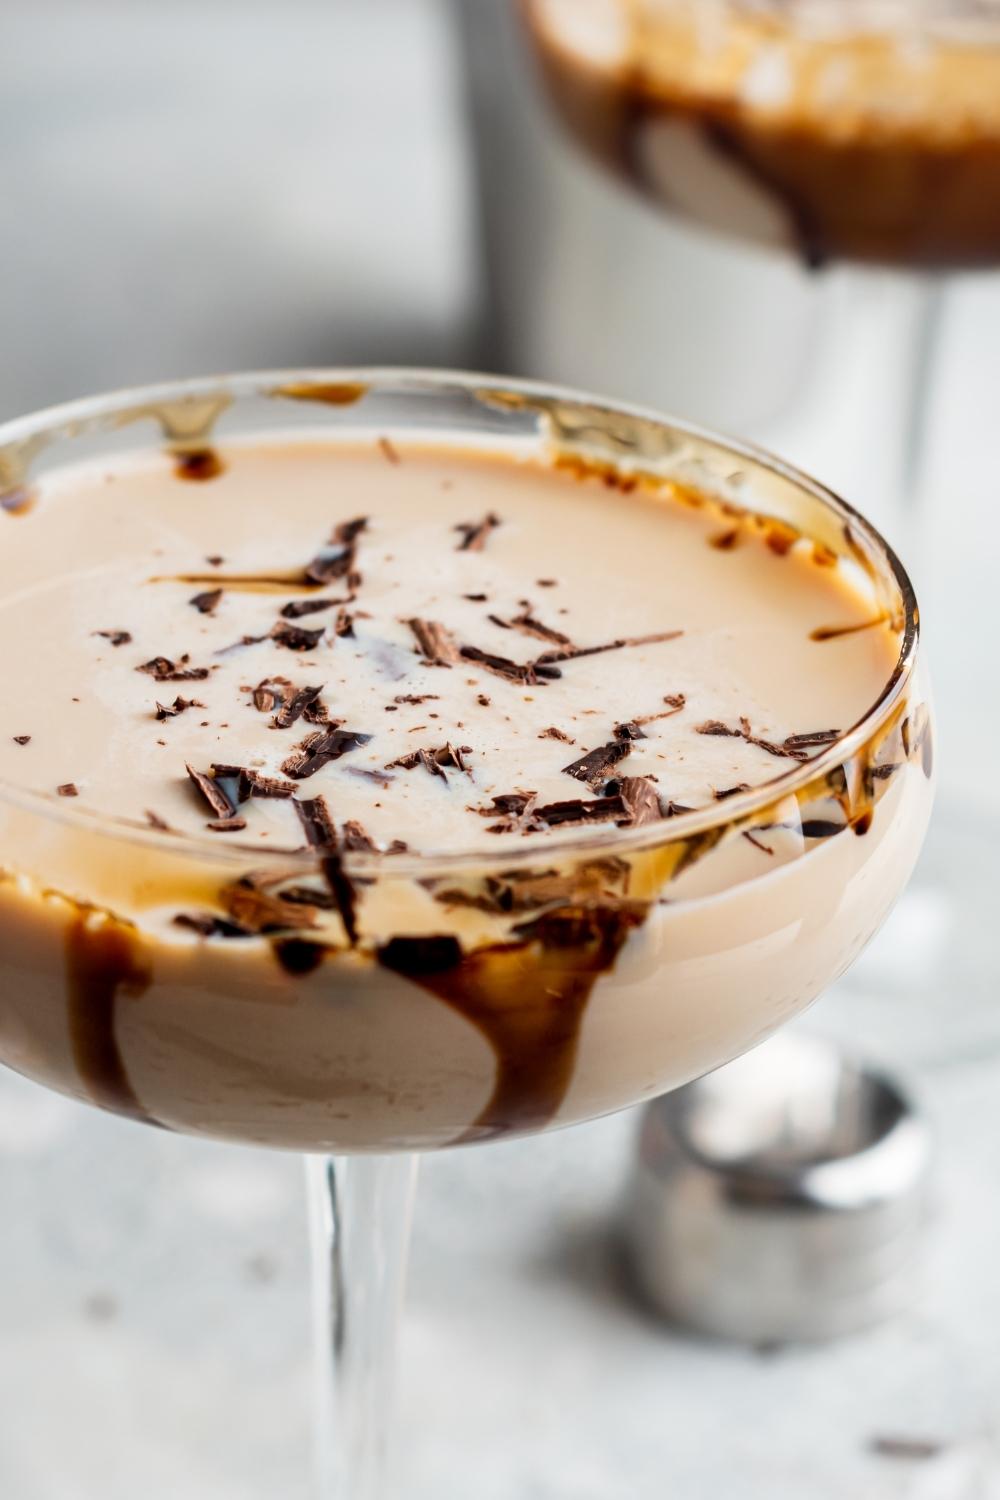 A close-up view of a mudslide cocktail in a cocktail stemmed glass. It is garnished with shaved chocolate and there is drizzled chocolate on the inside of the glass.